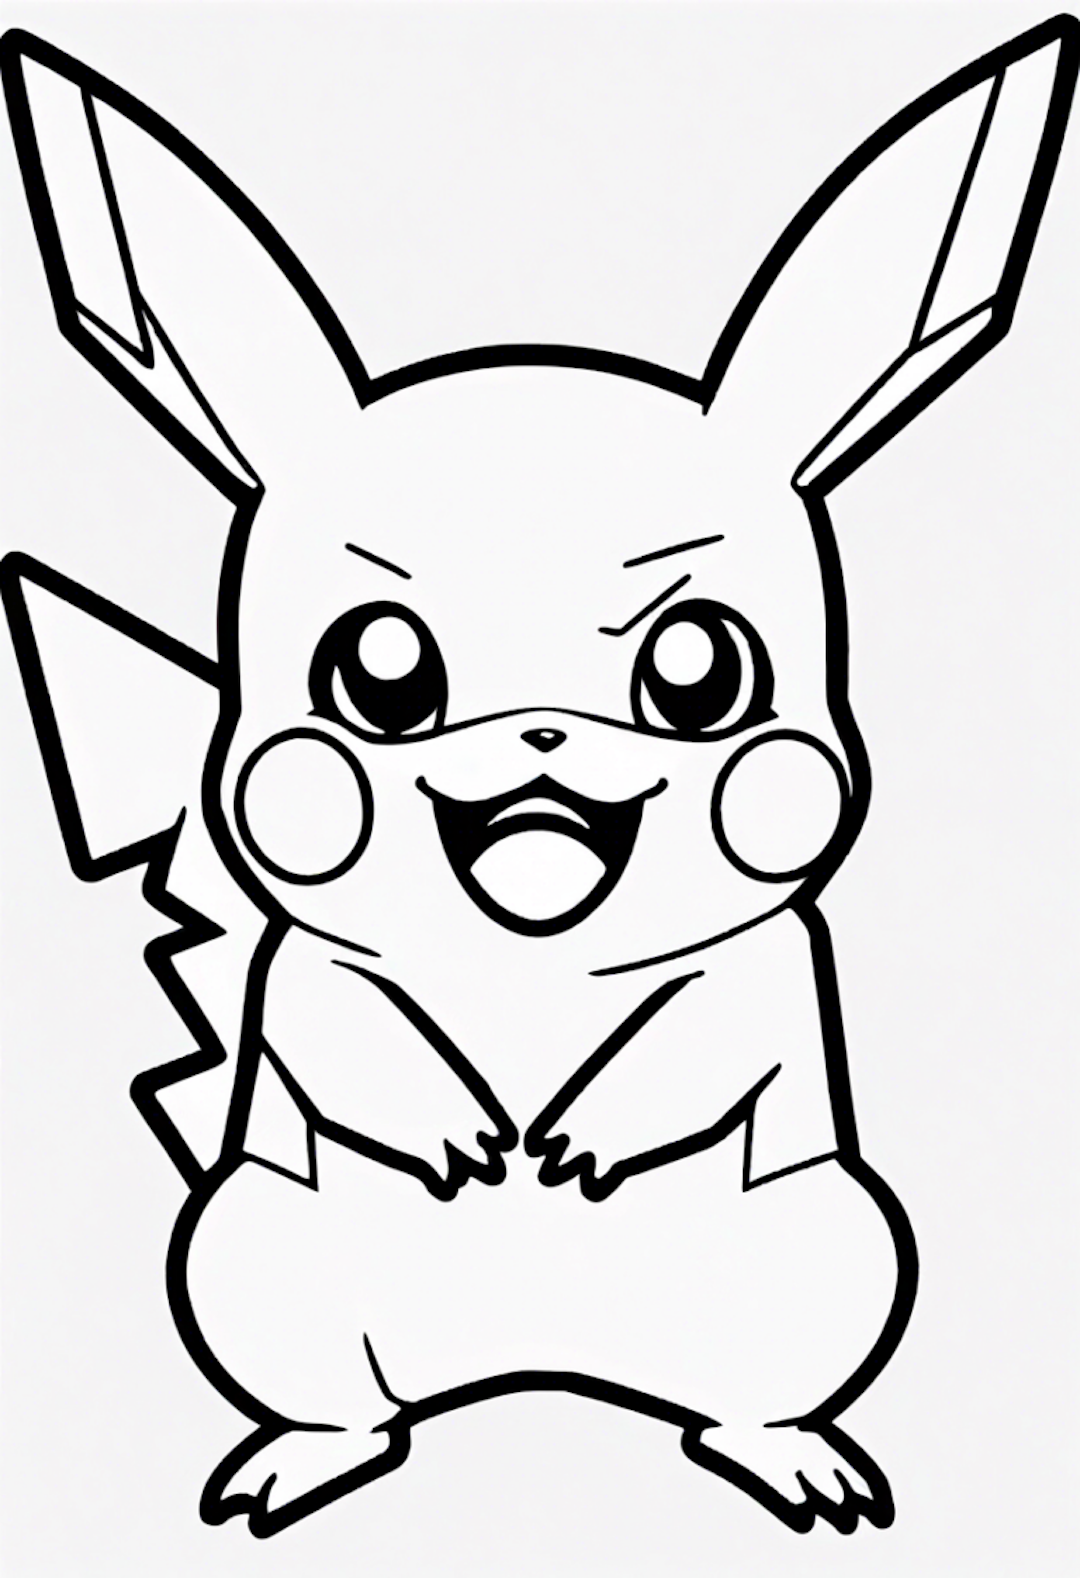 Scared Pikachu coloring pages